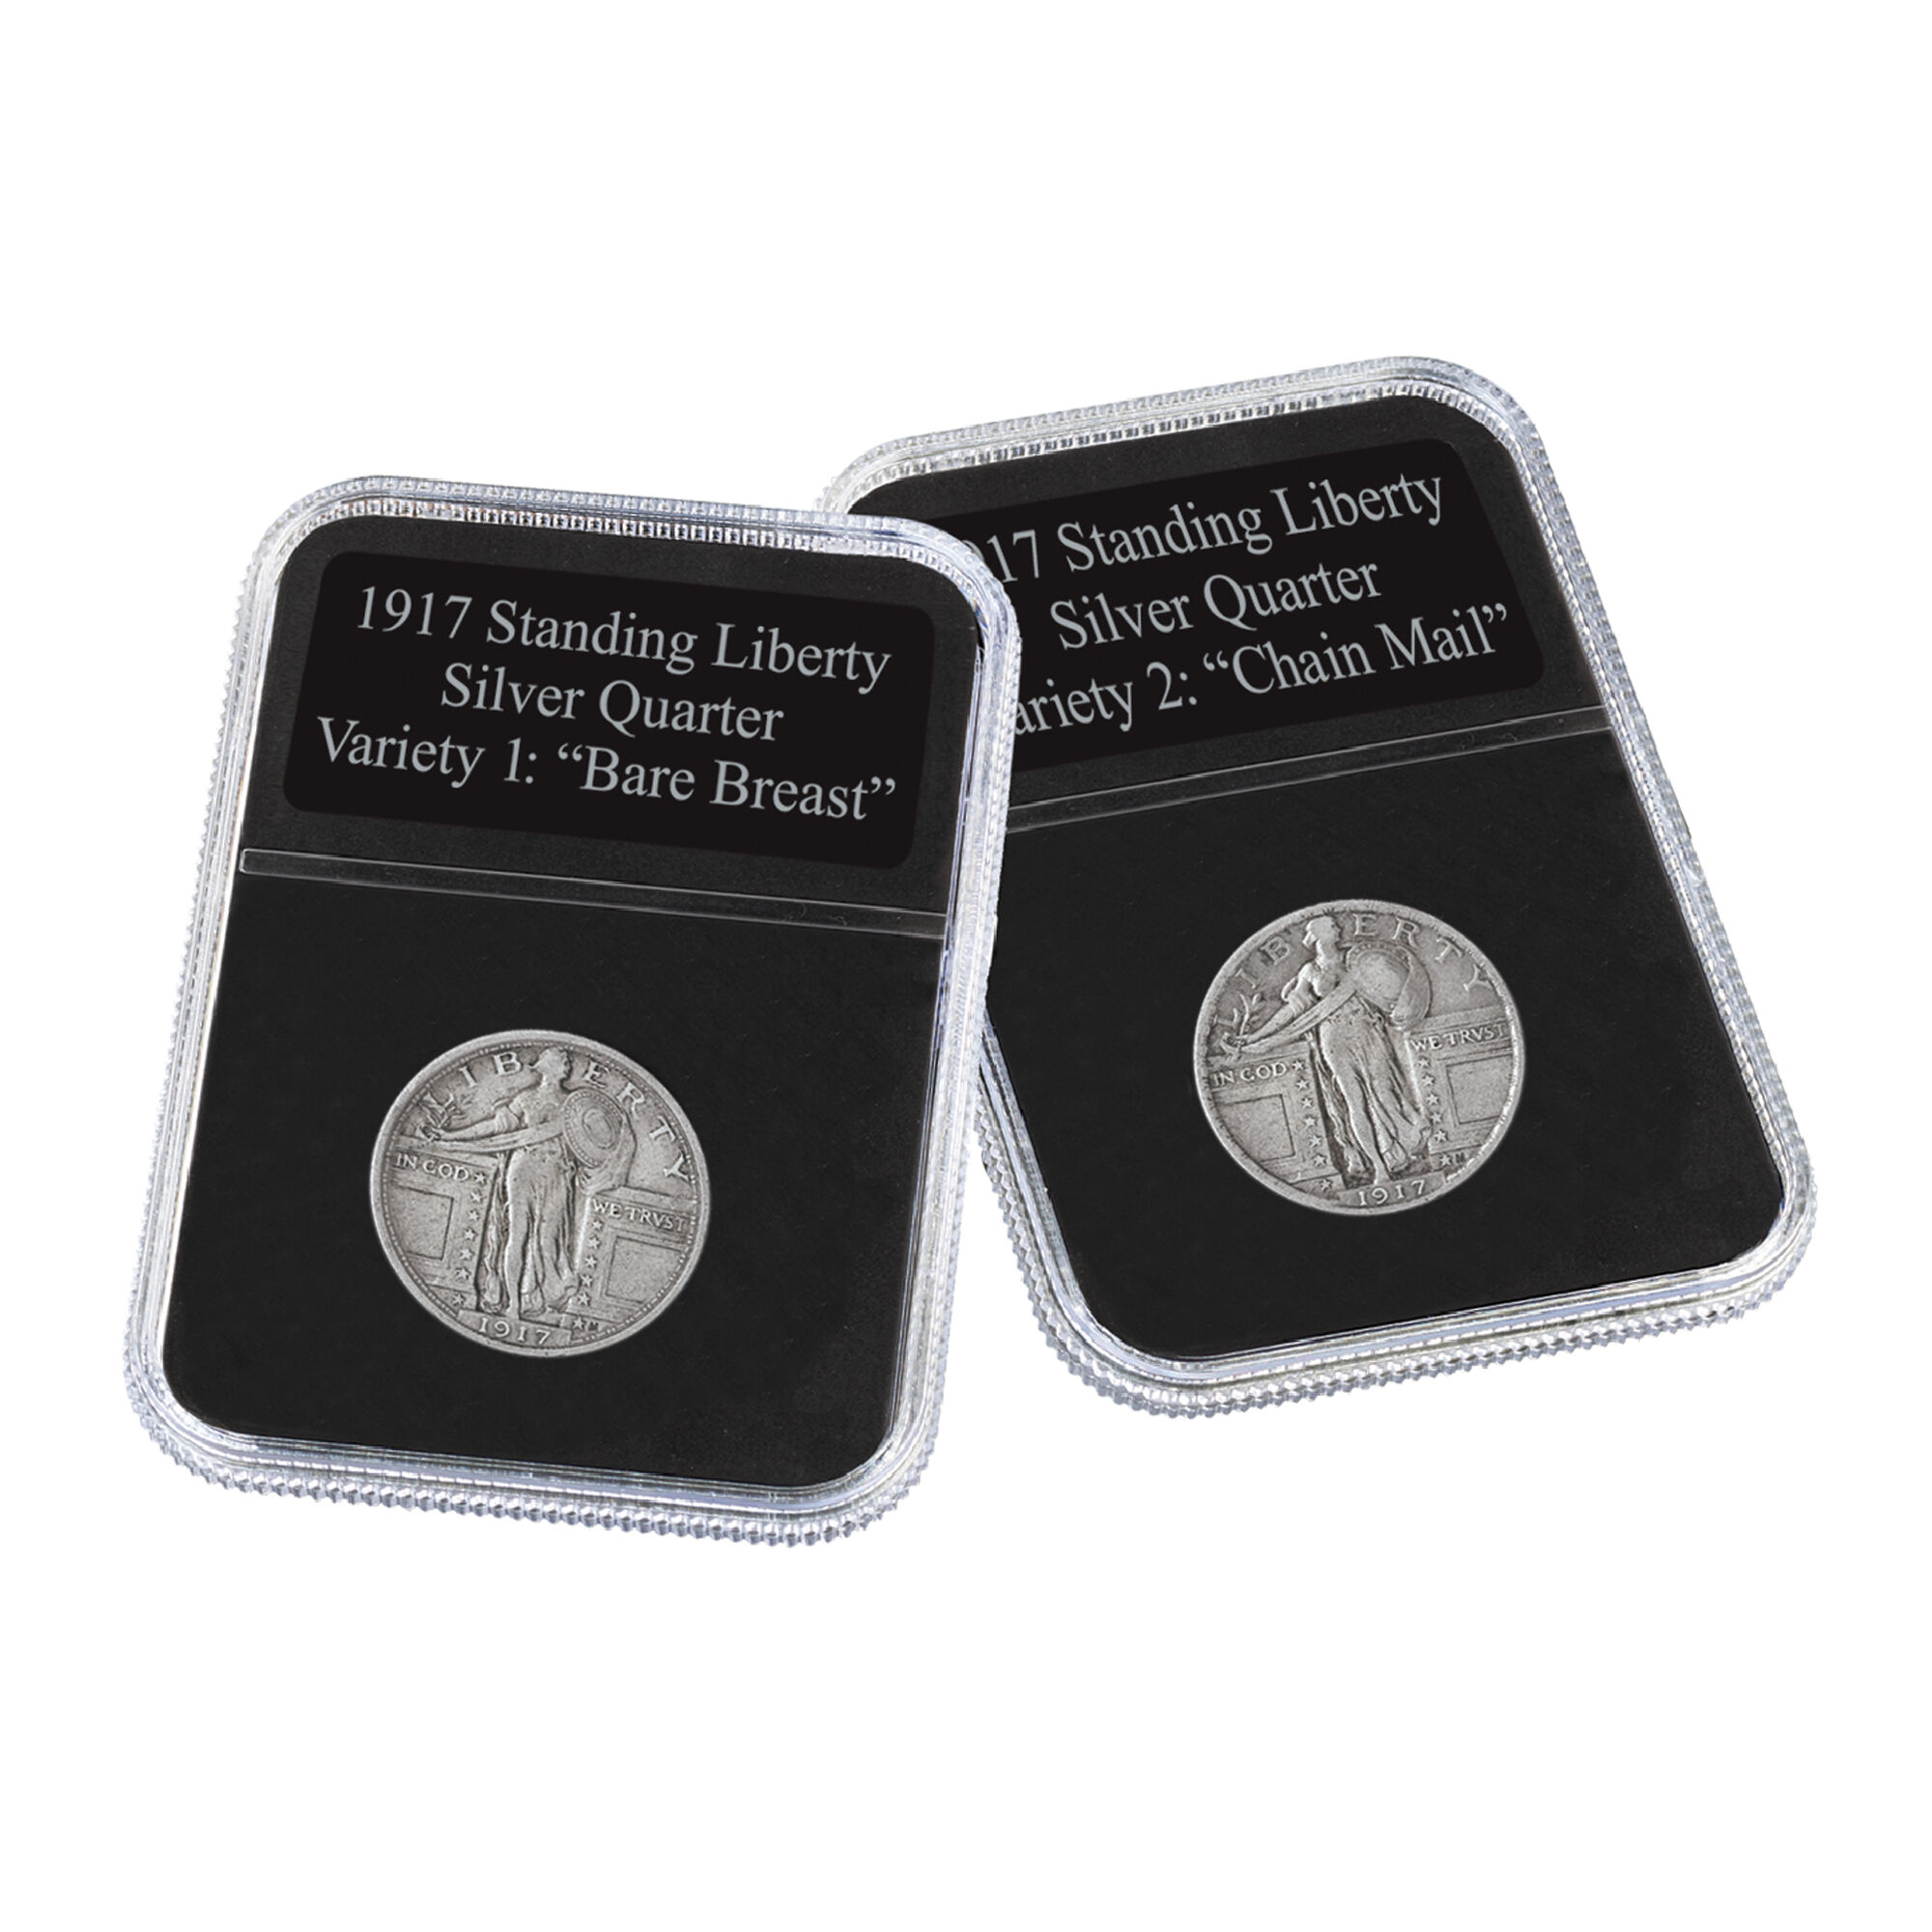 The 1917 Standing Liberty Silver Quarter Set 6811 0014 d capsules